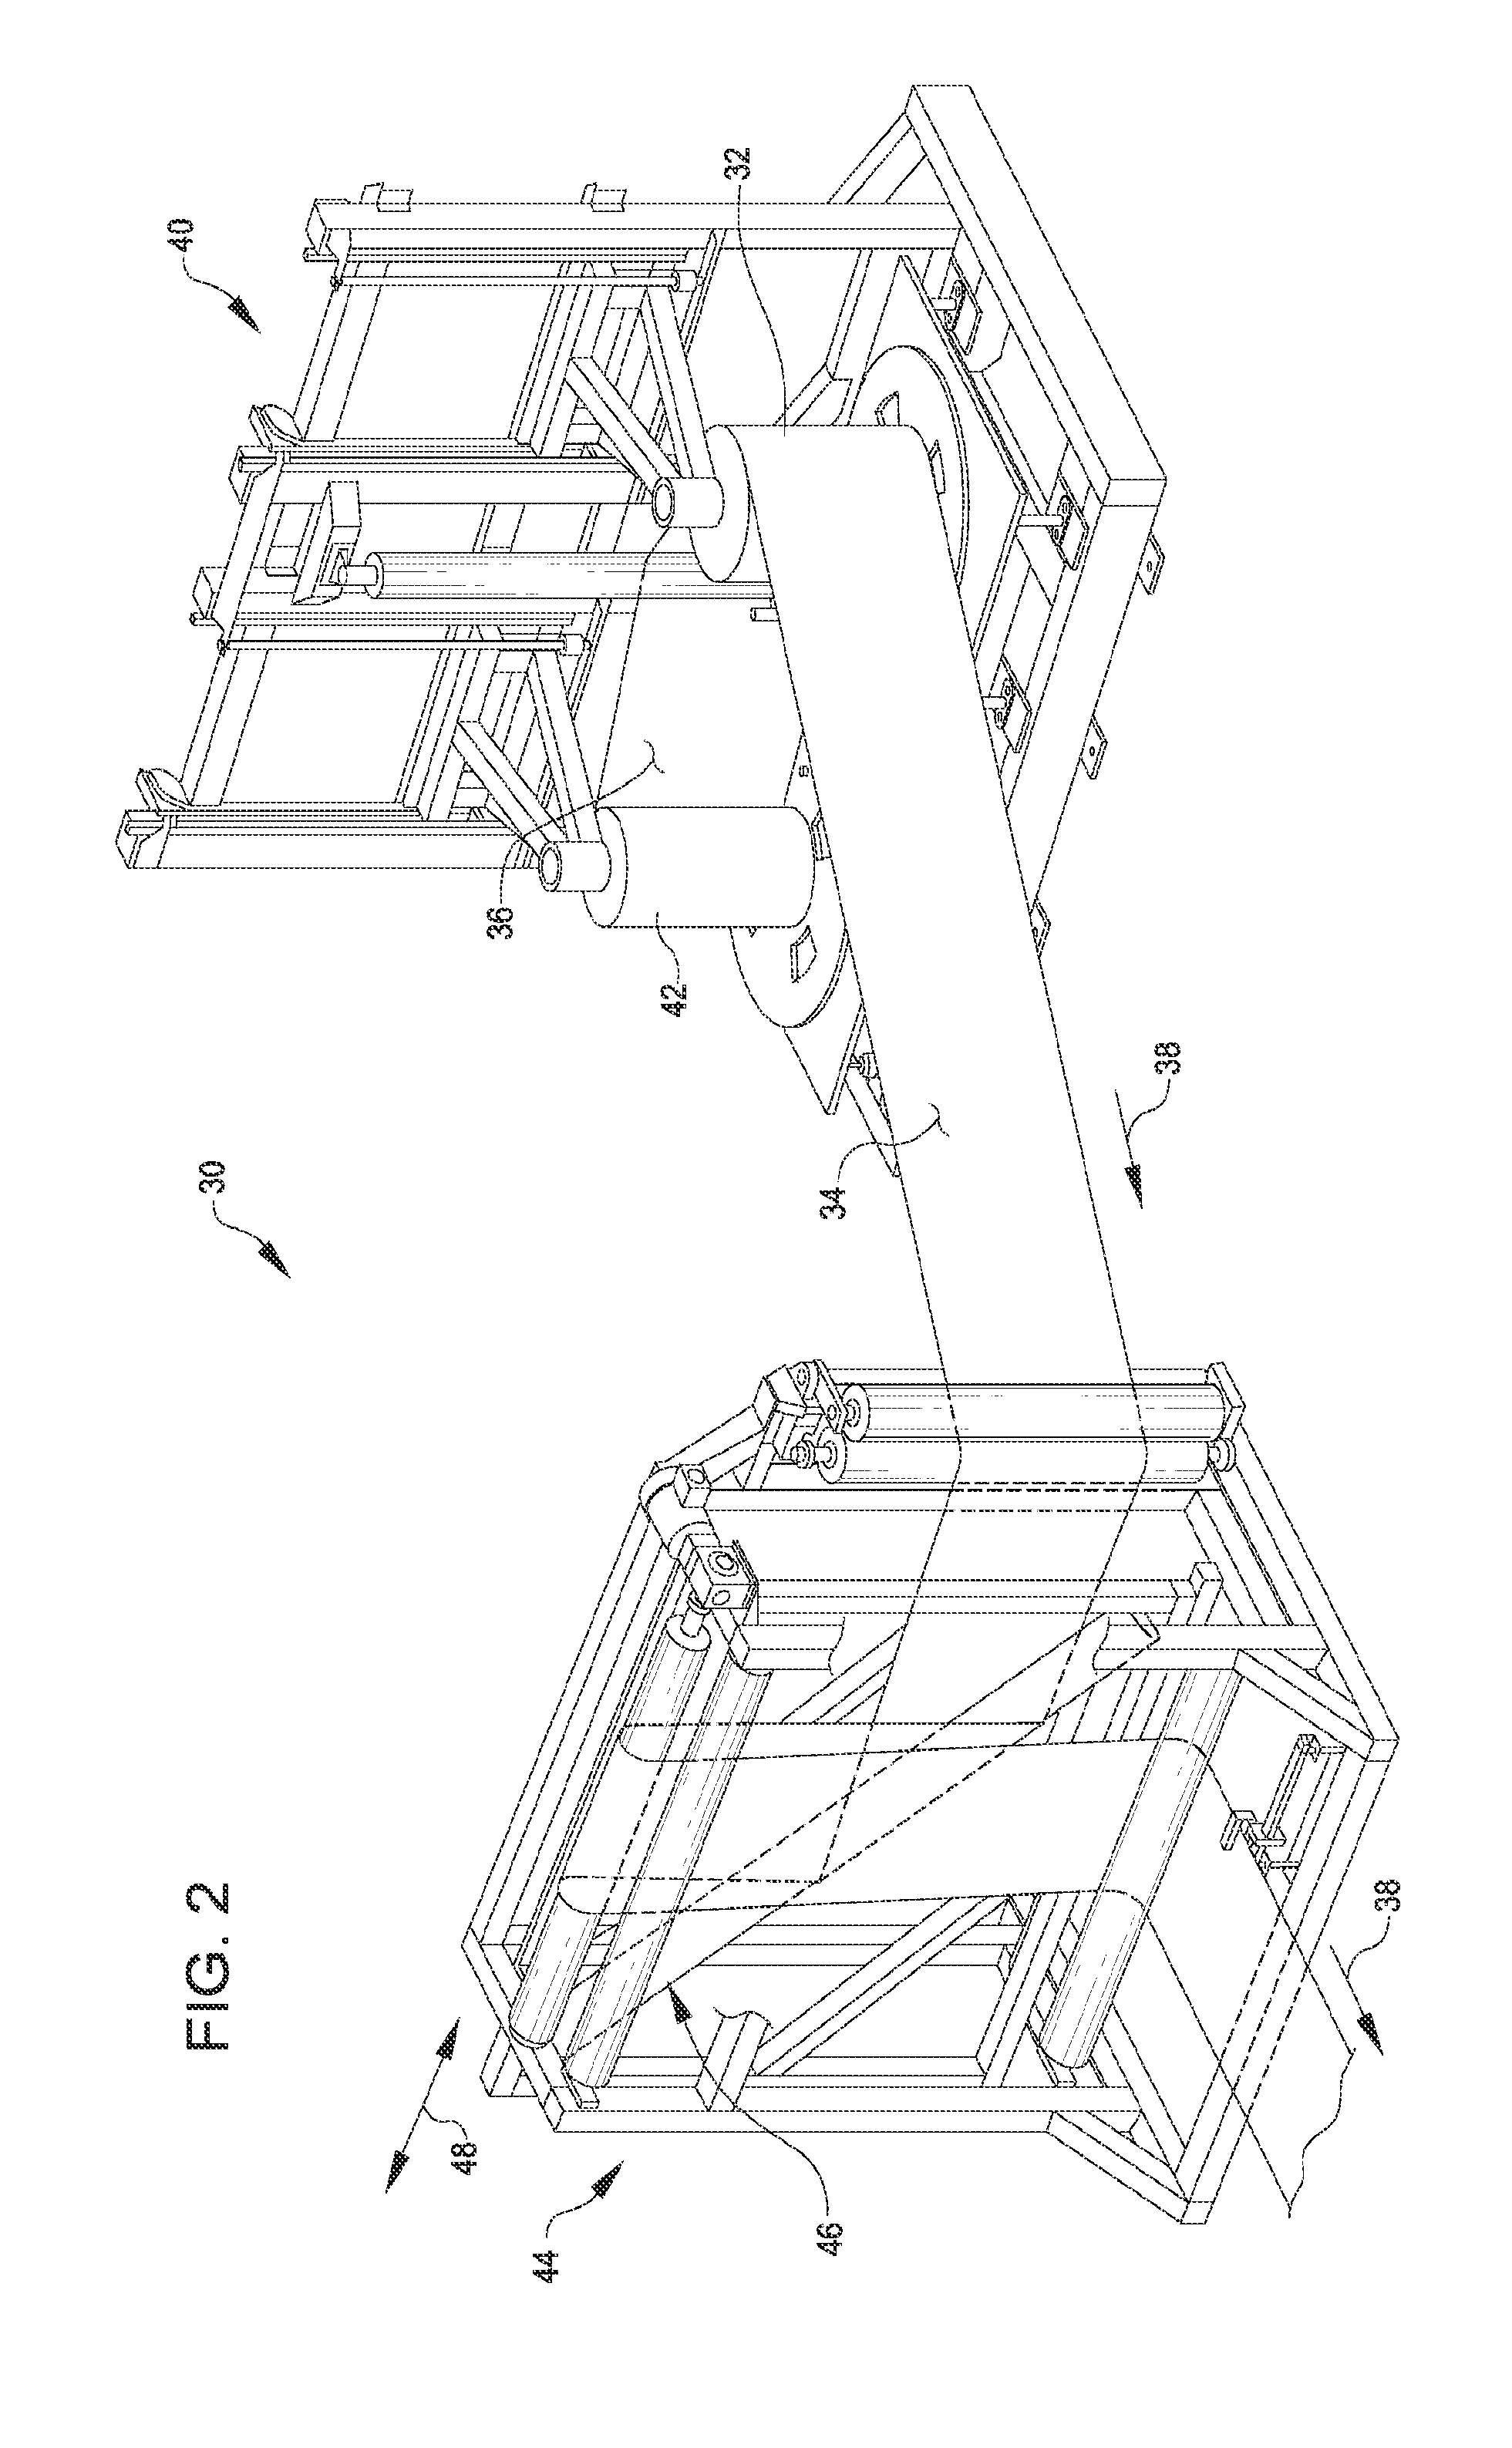 Systems for unwinding a roll of thermoplastic material interleaved with a porous material, and related methods